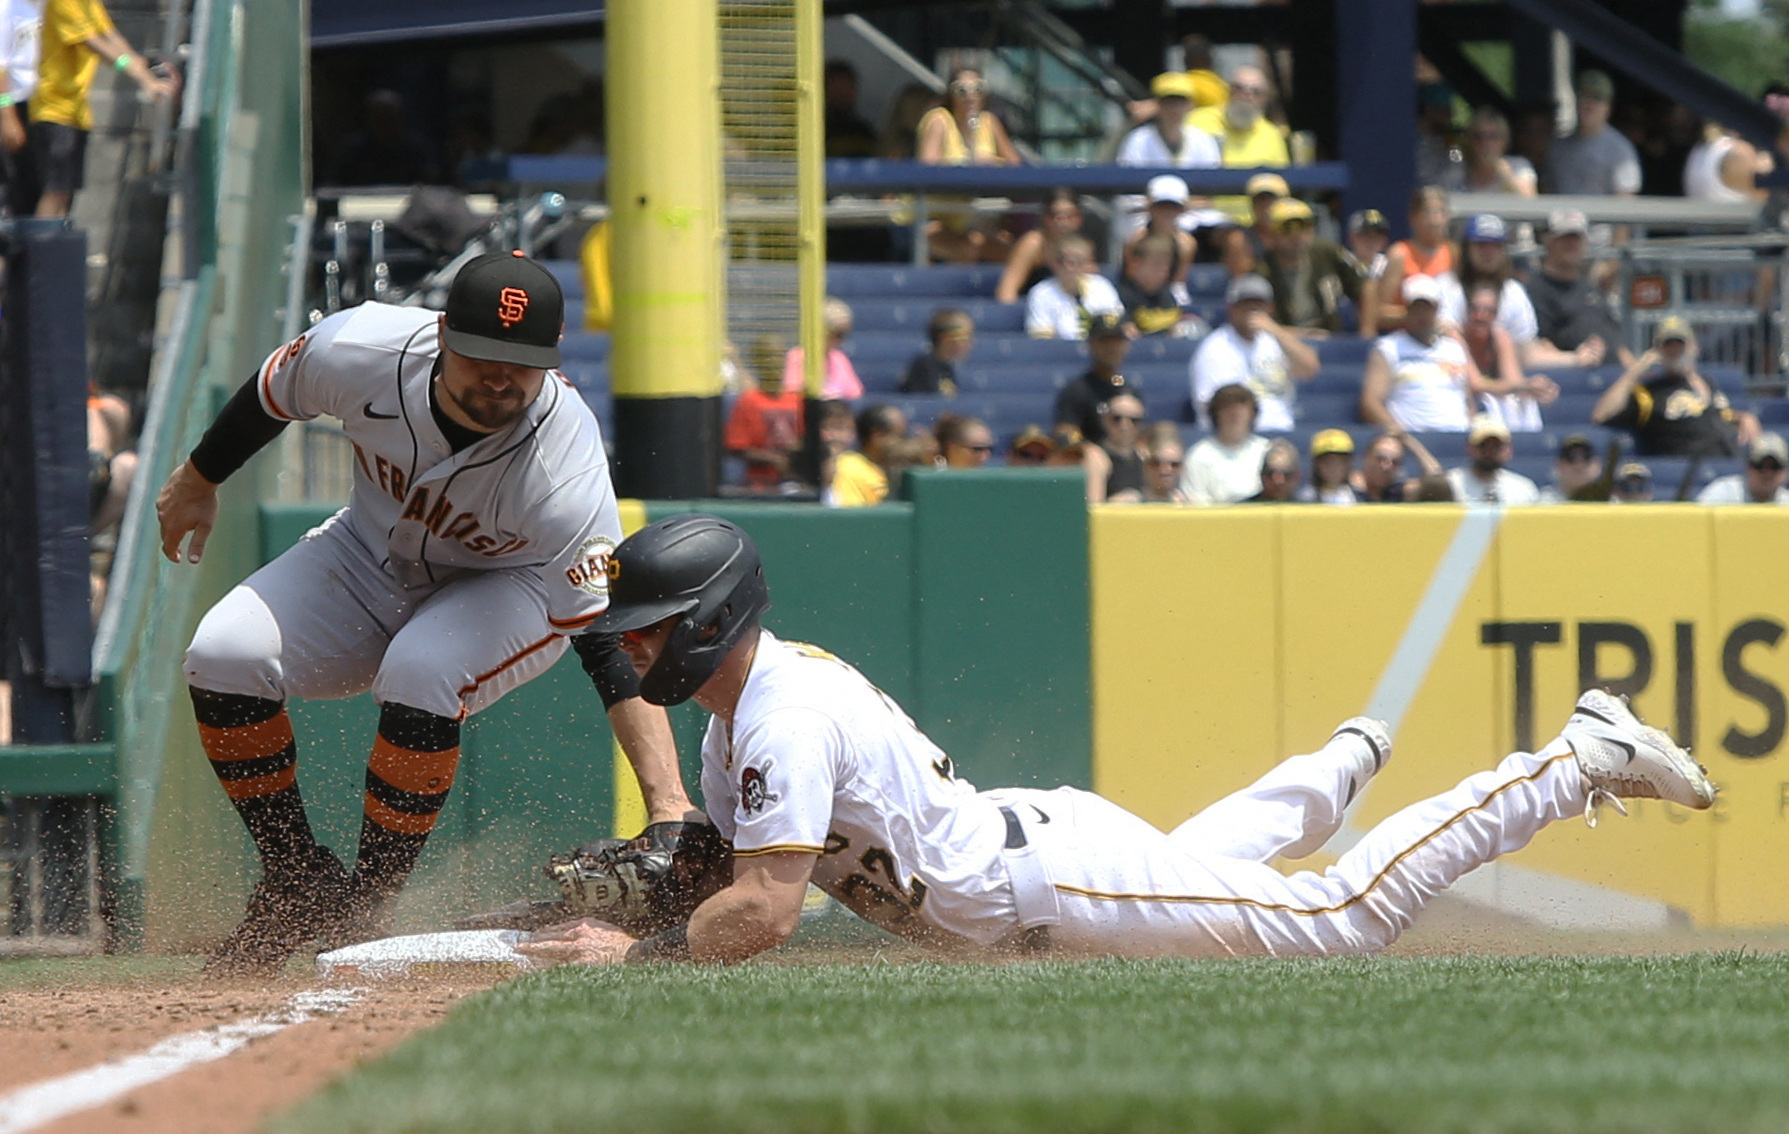 Giants erupt for 5 runs in the 10th to down Pirates